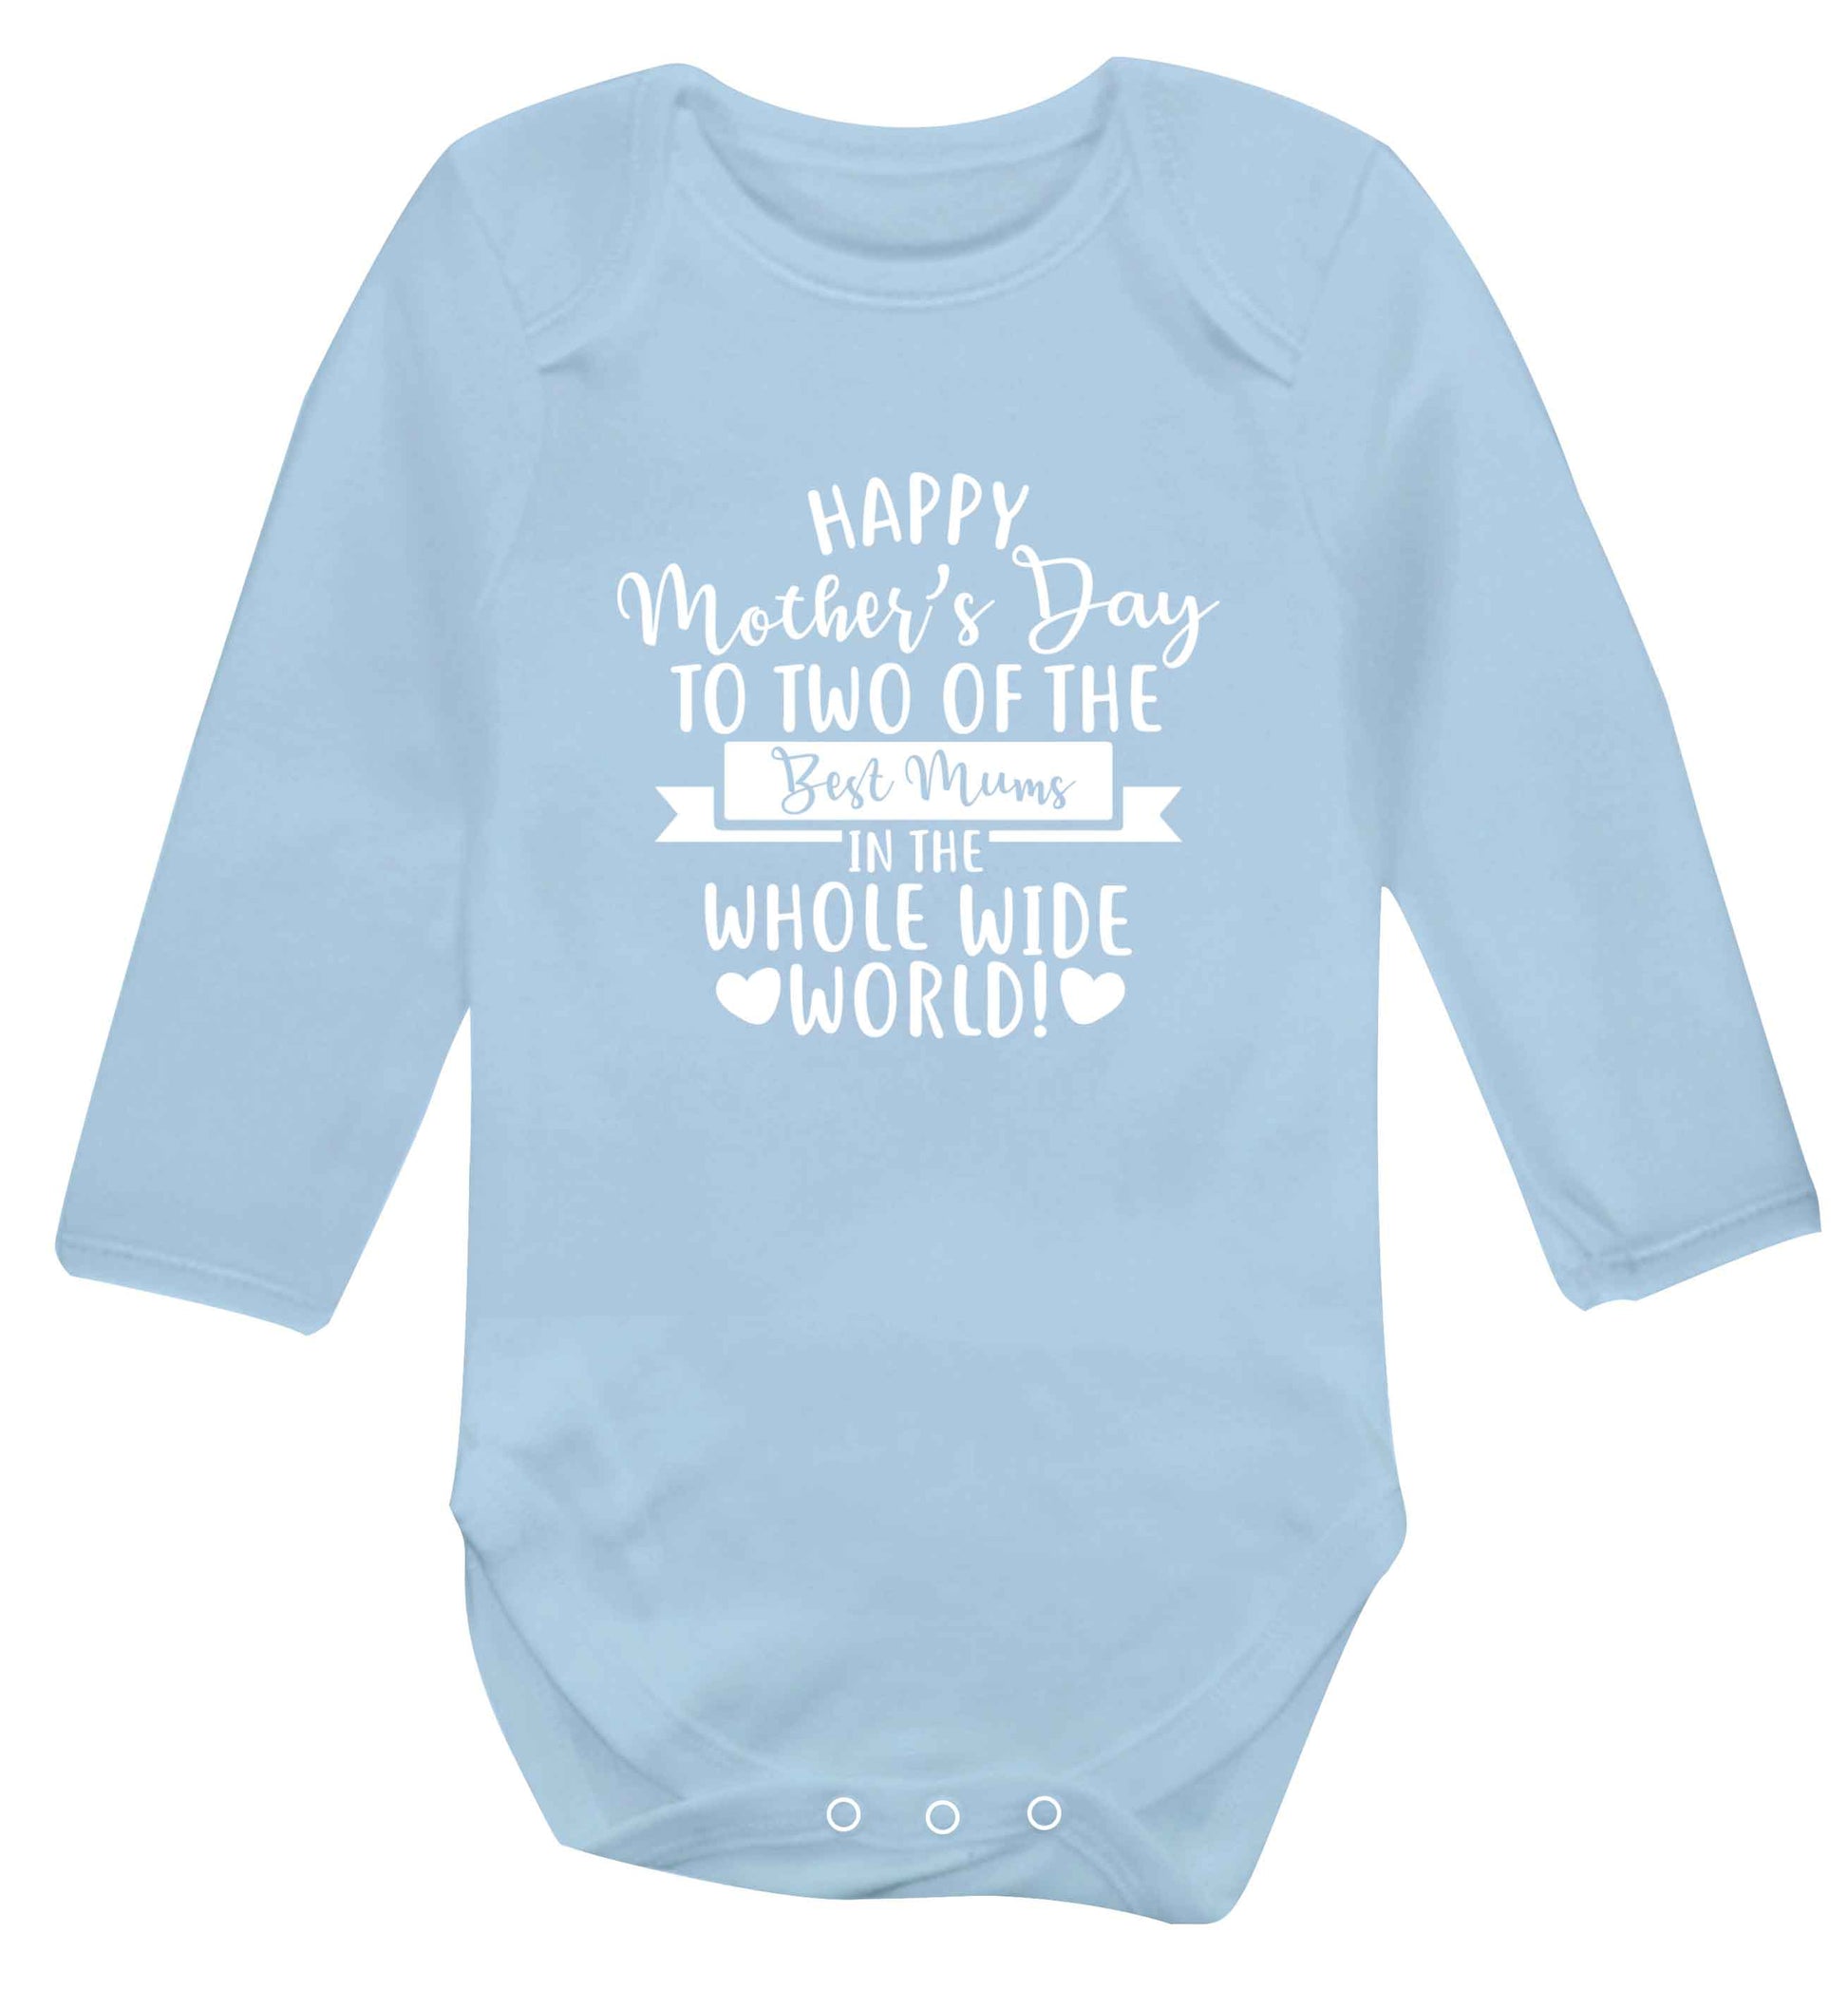 Happy mother's day to two of the best mums in the whole wide world baby vest long sleeved pale blue 6-12 months